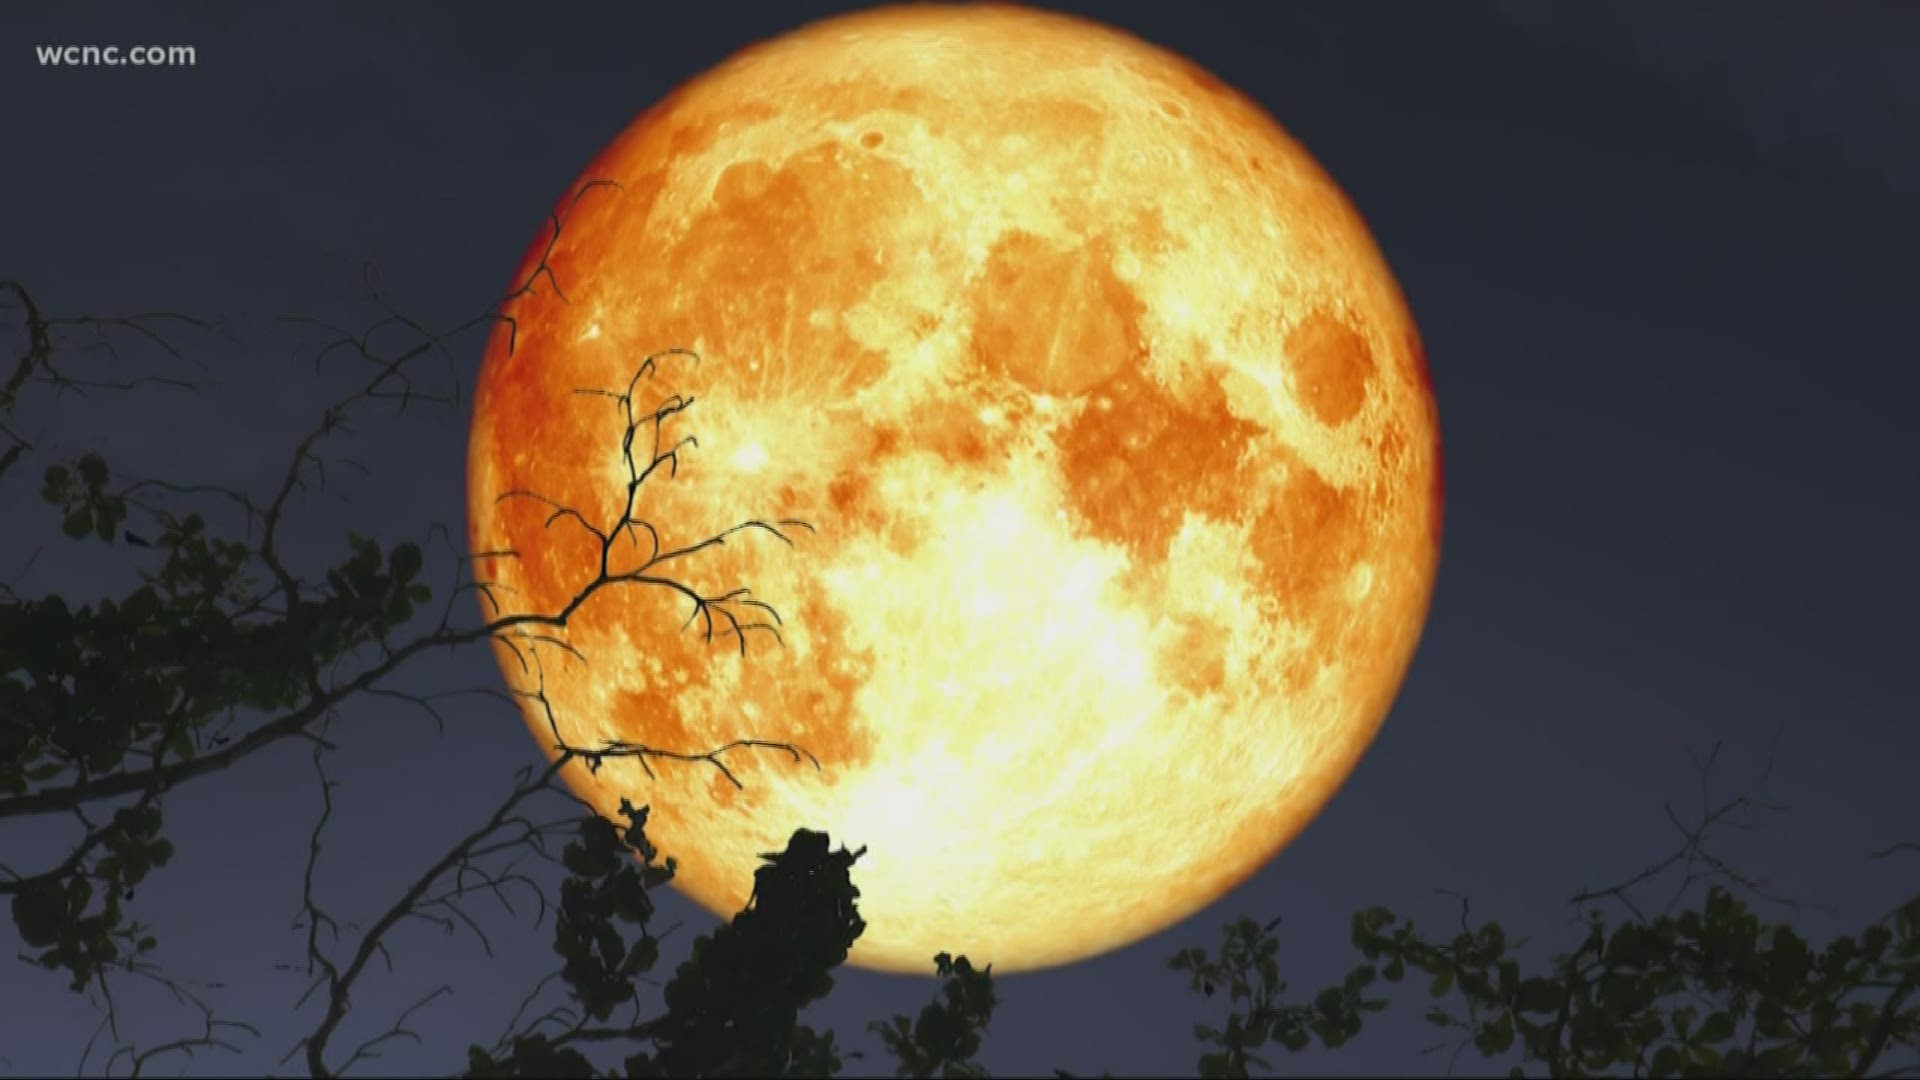 Friday the 13th harvest moon tonight, St. Louis skies clear